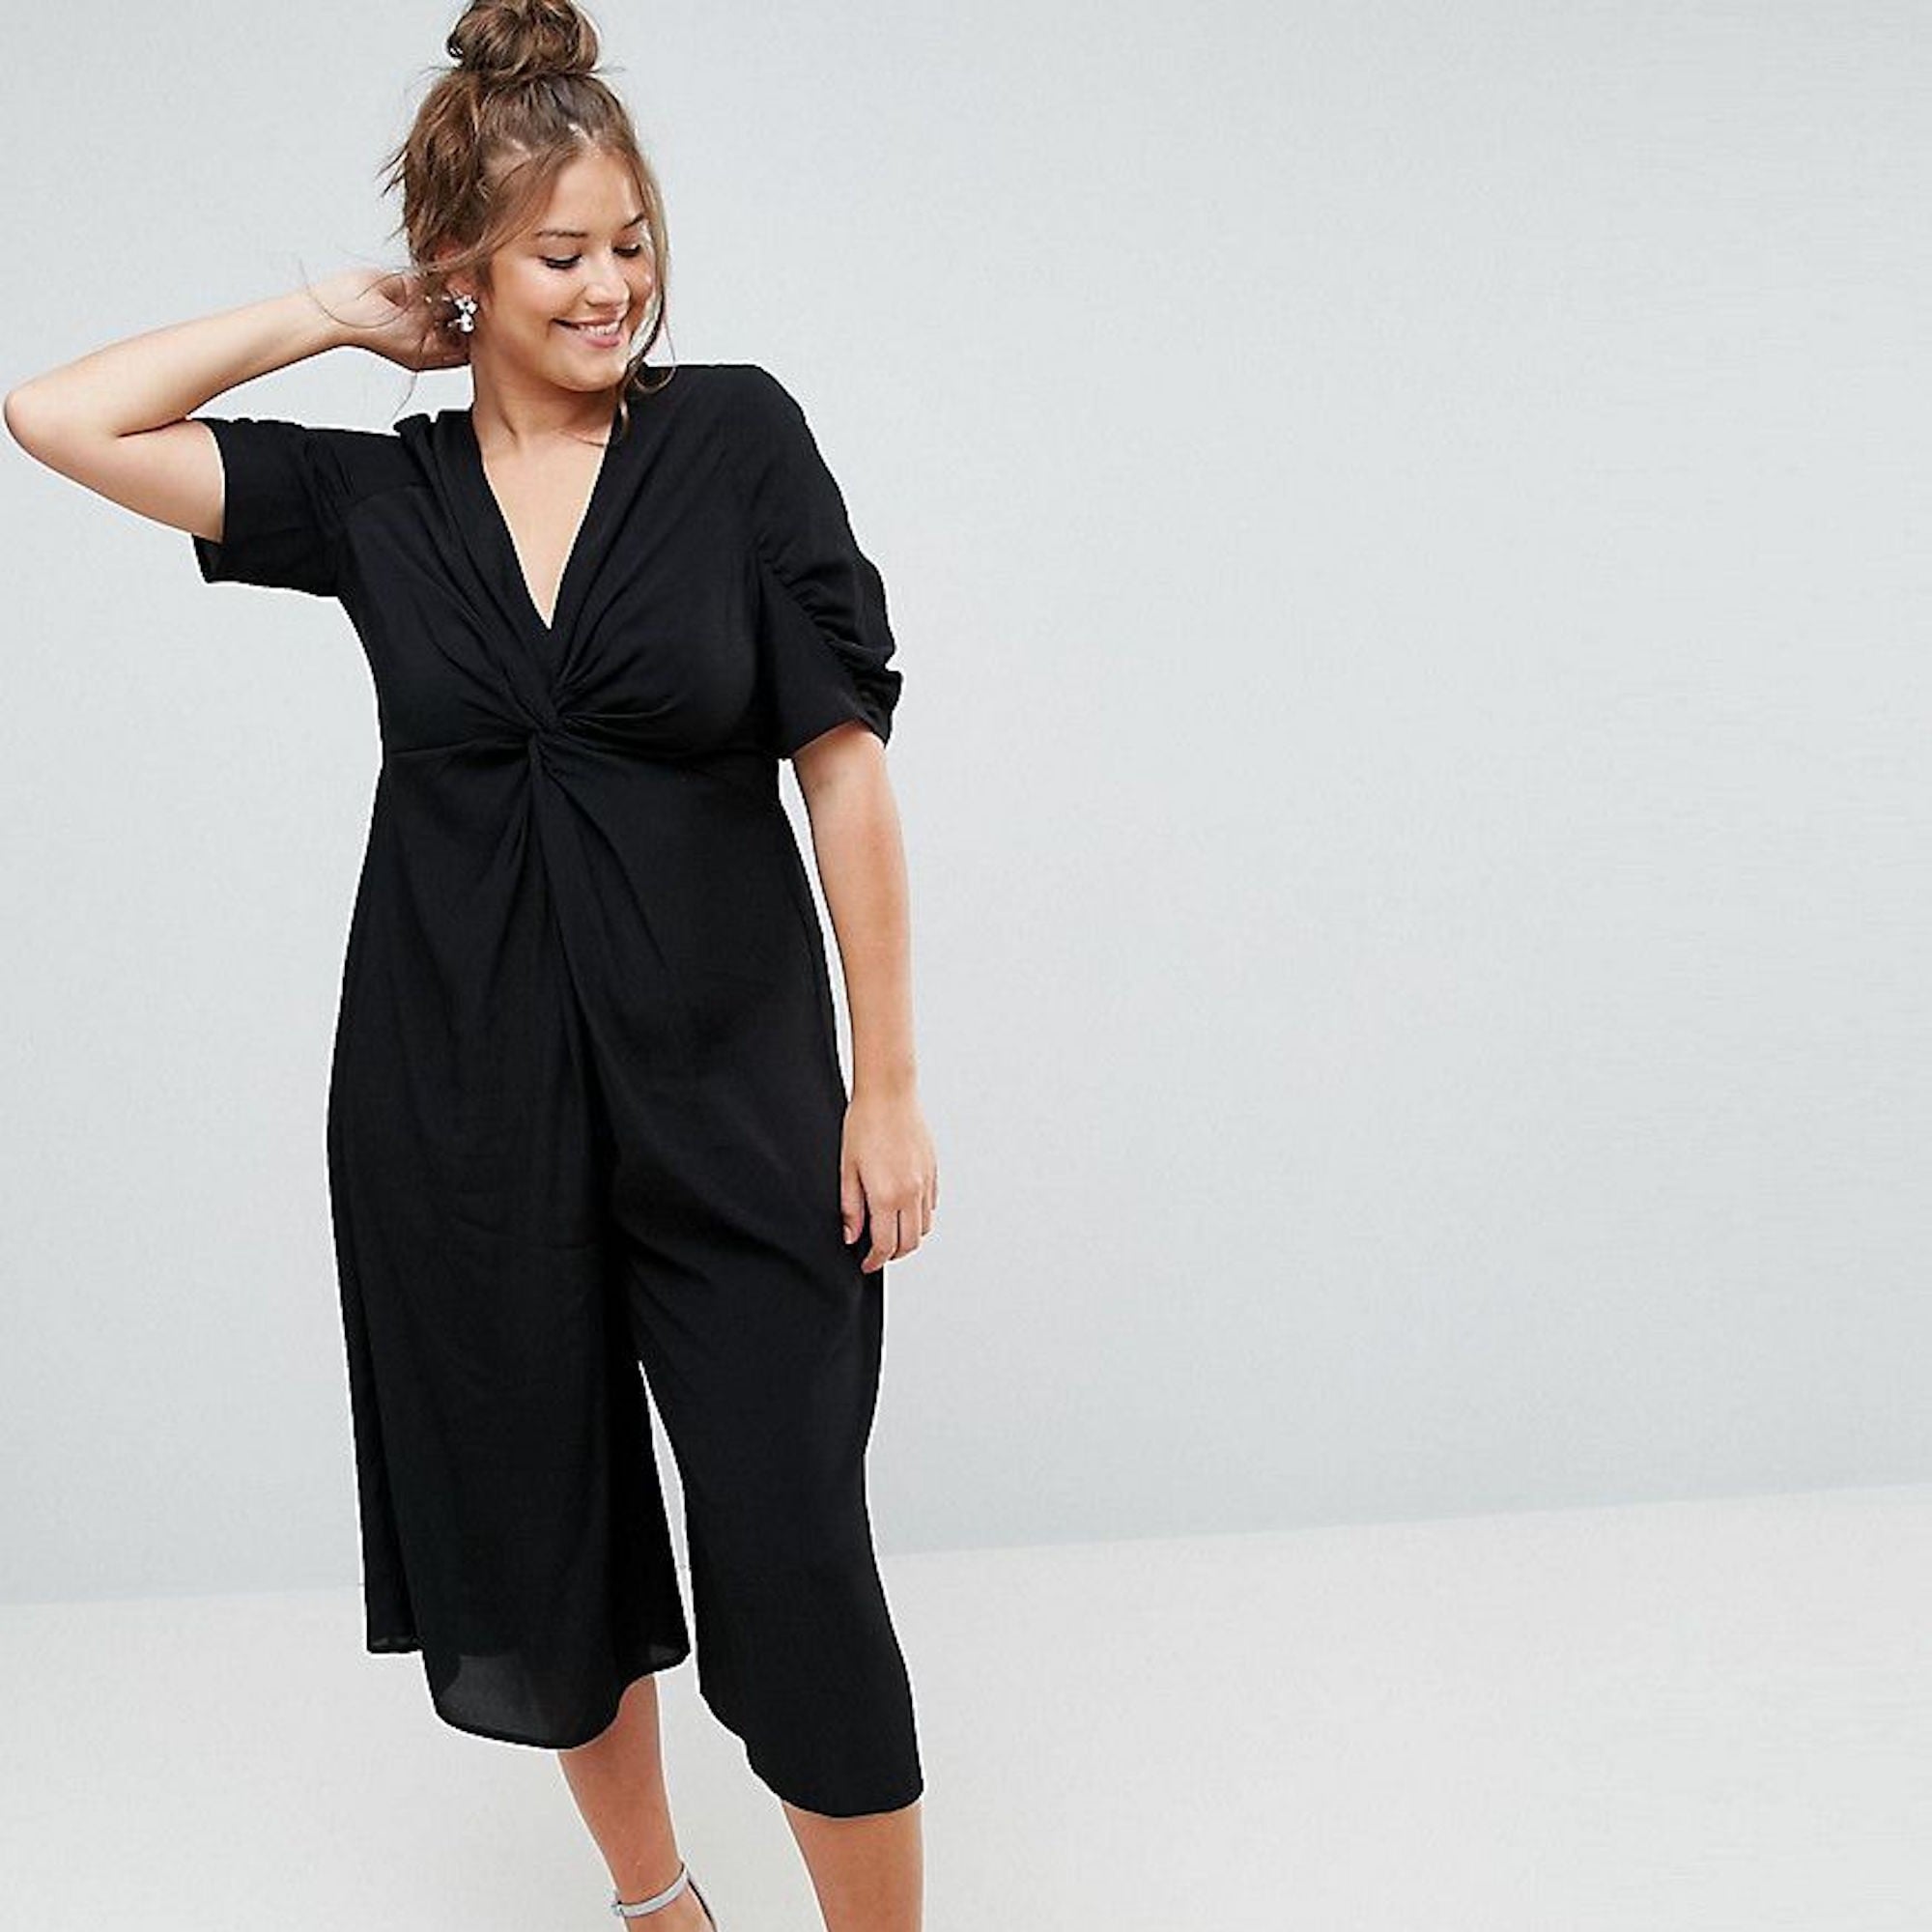 flattering styles for overweight